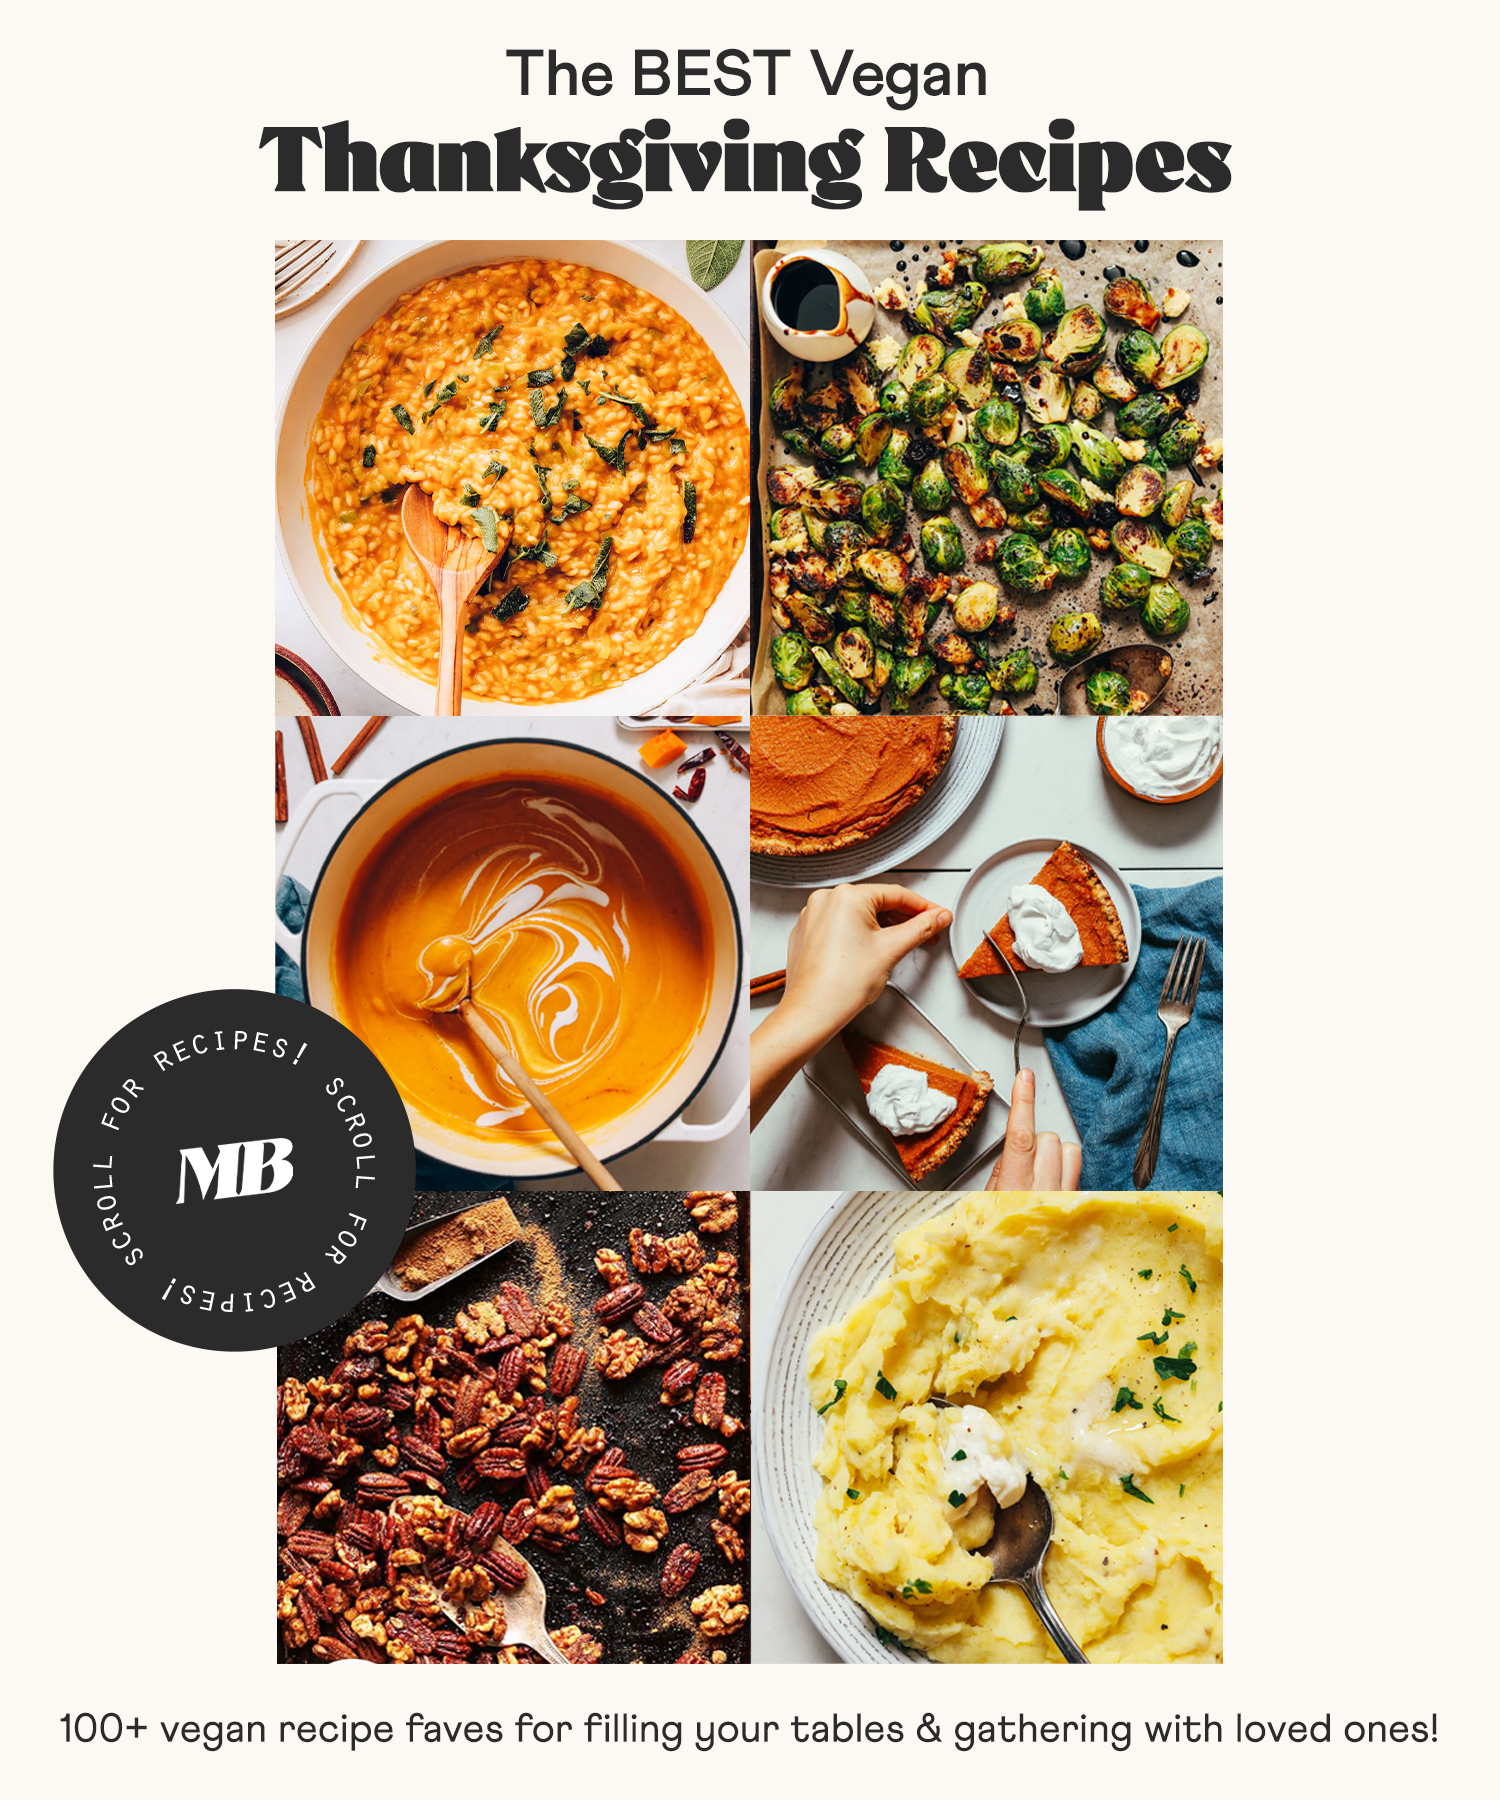 Images of the best vegan thanksgiving recipes